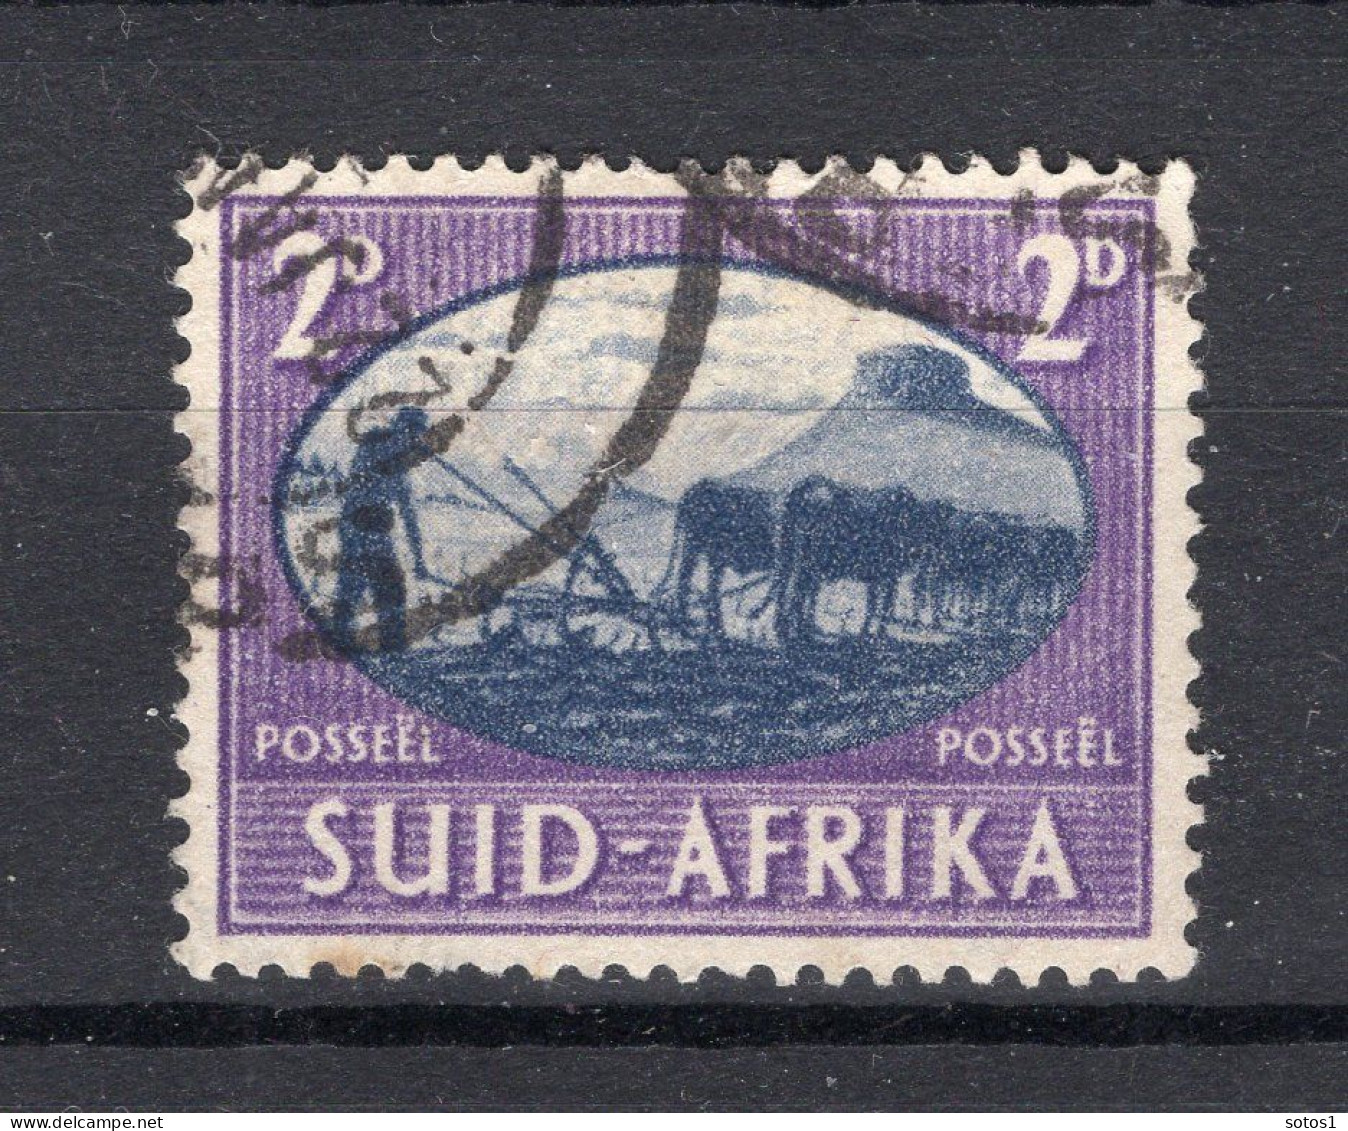 ZUID AFRIKA Yt. 158° Gestempeld 1946 - Used Stamps